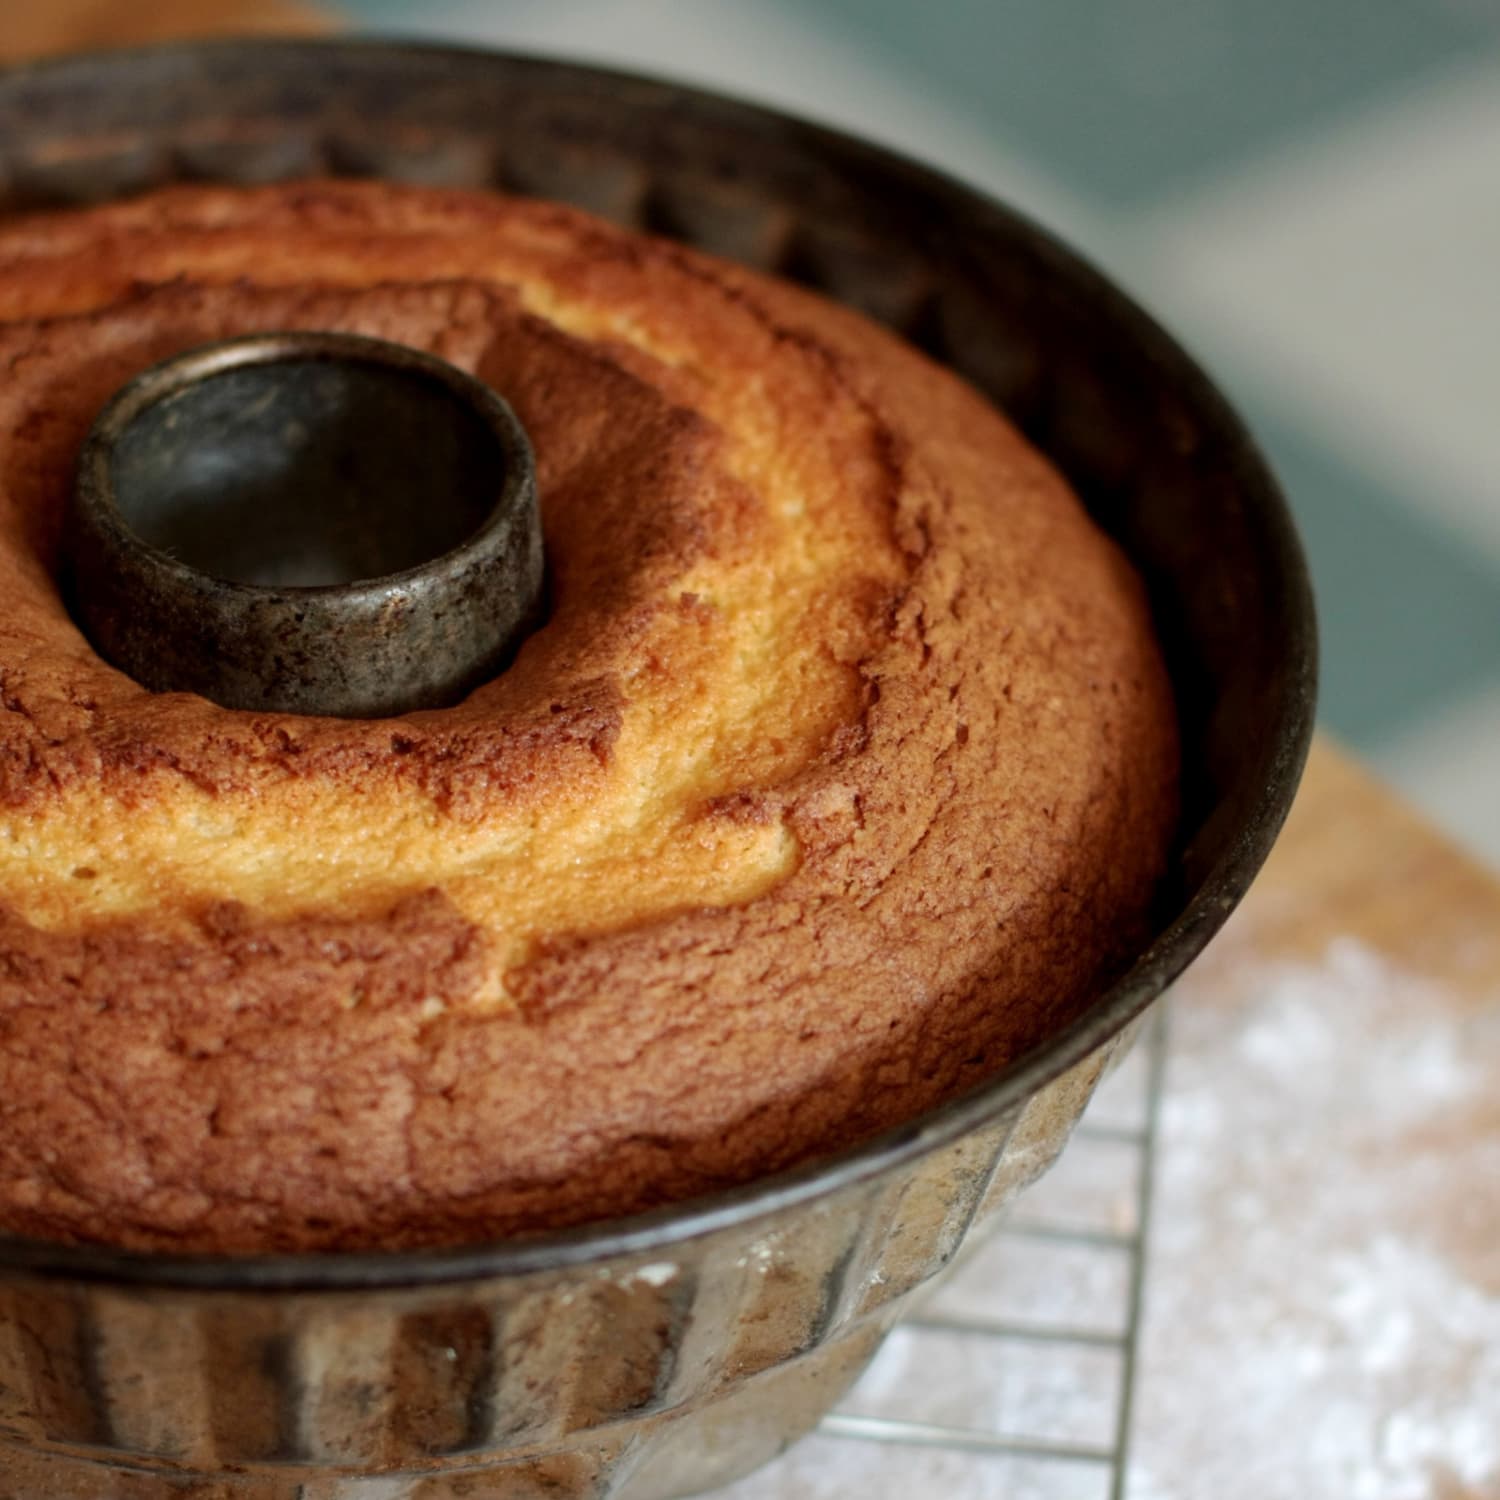 How to Get Cake Out of a Bundt Pan in One Piece